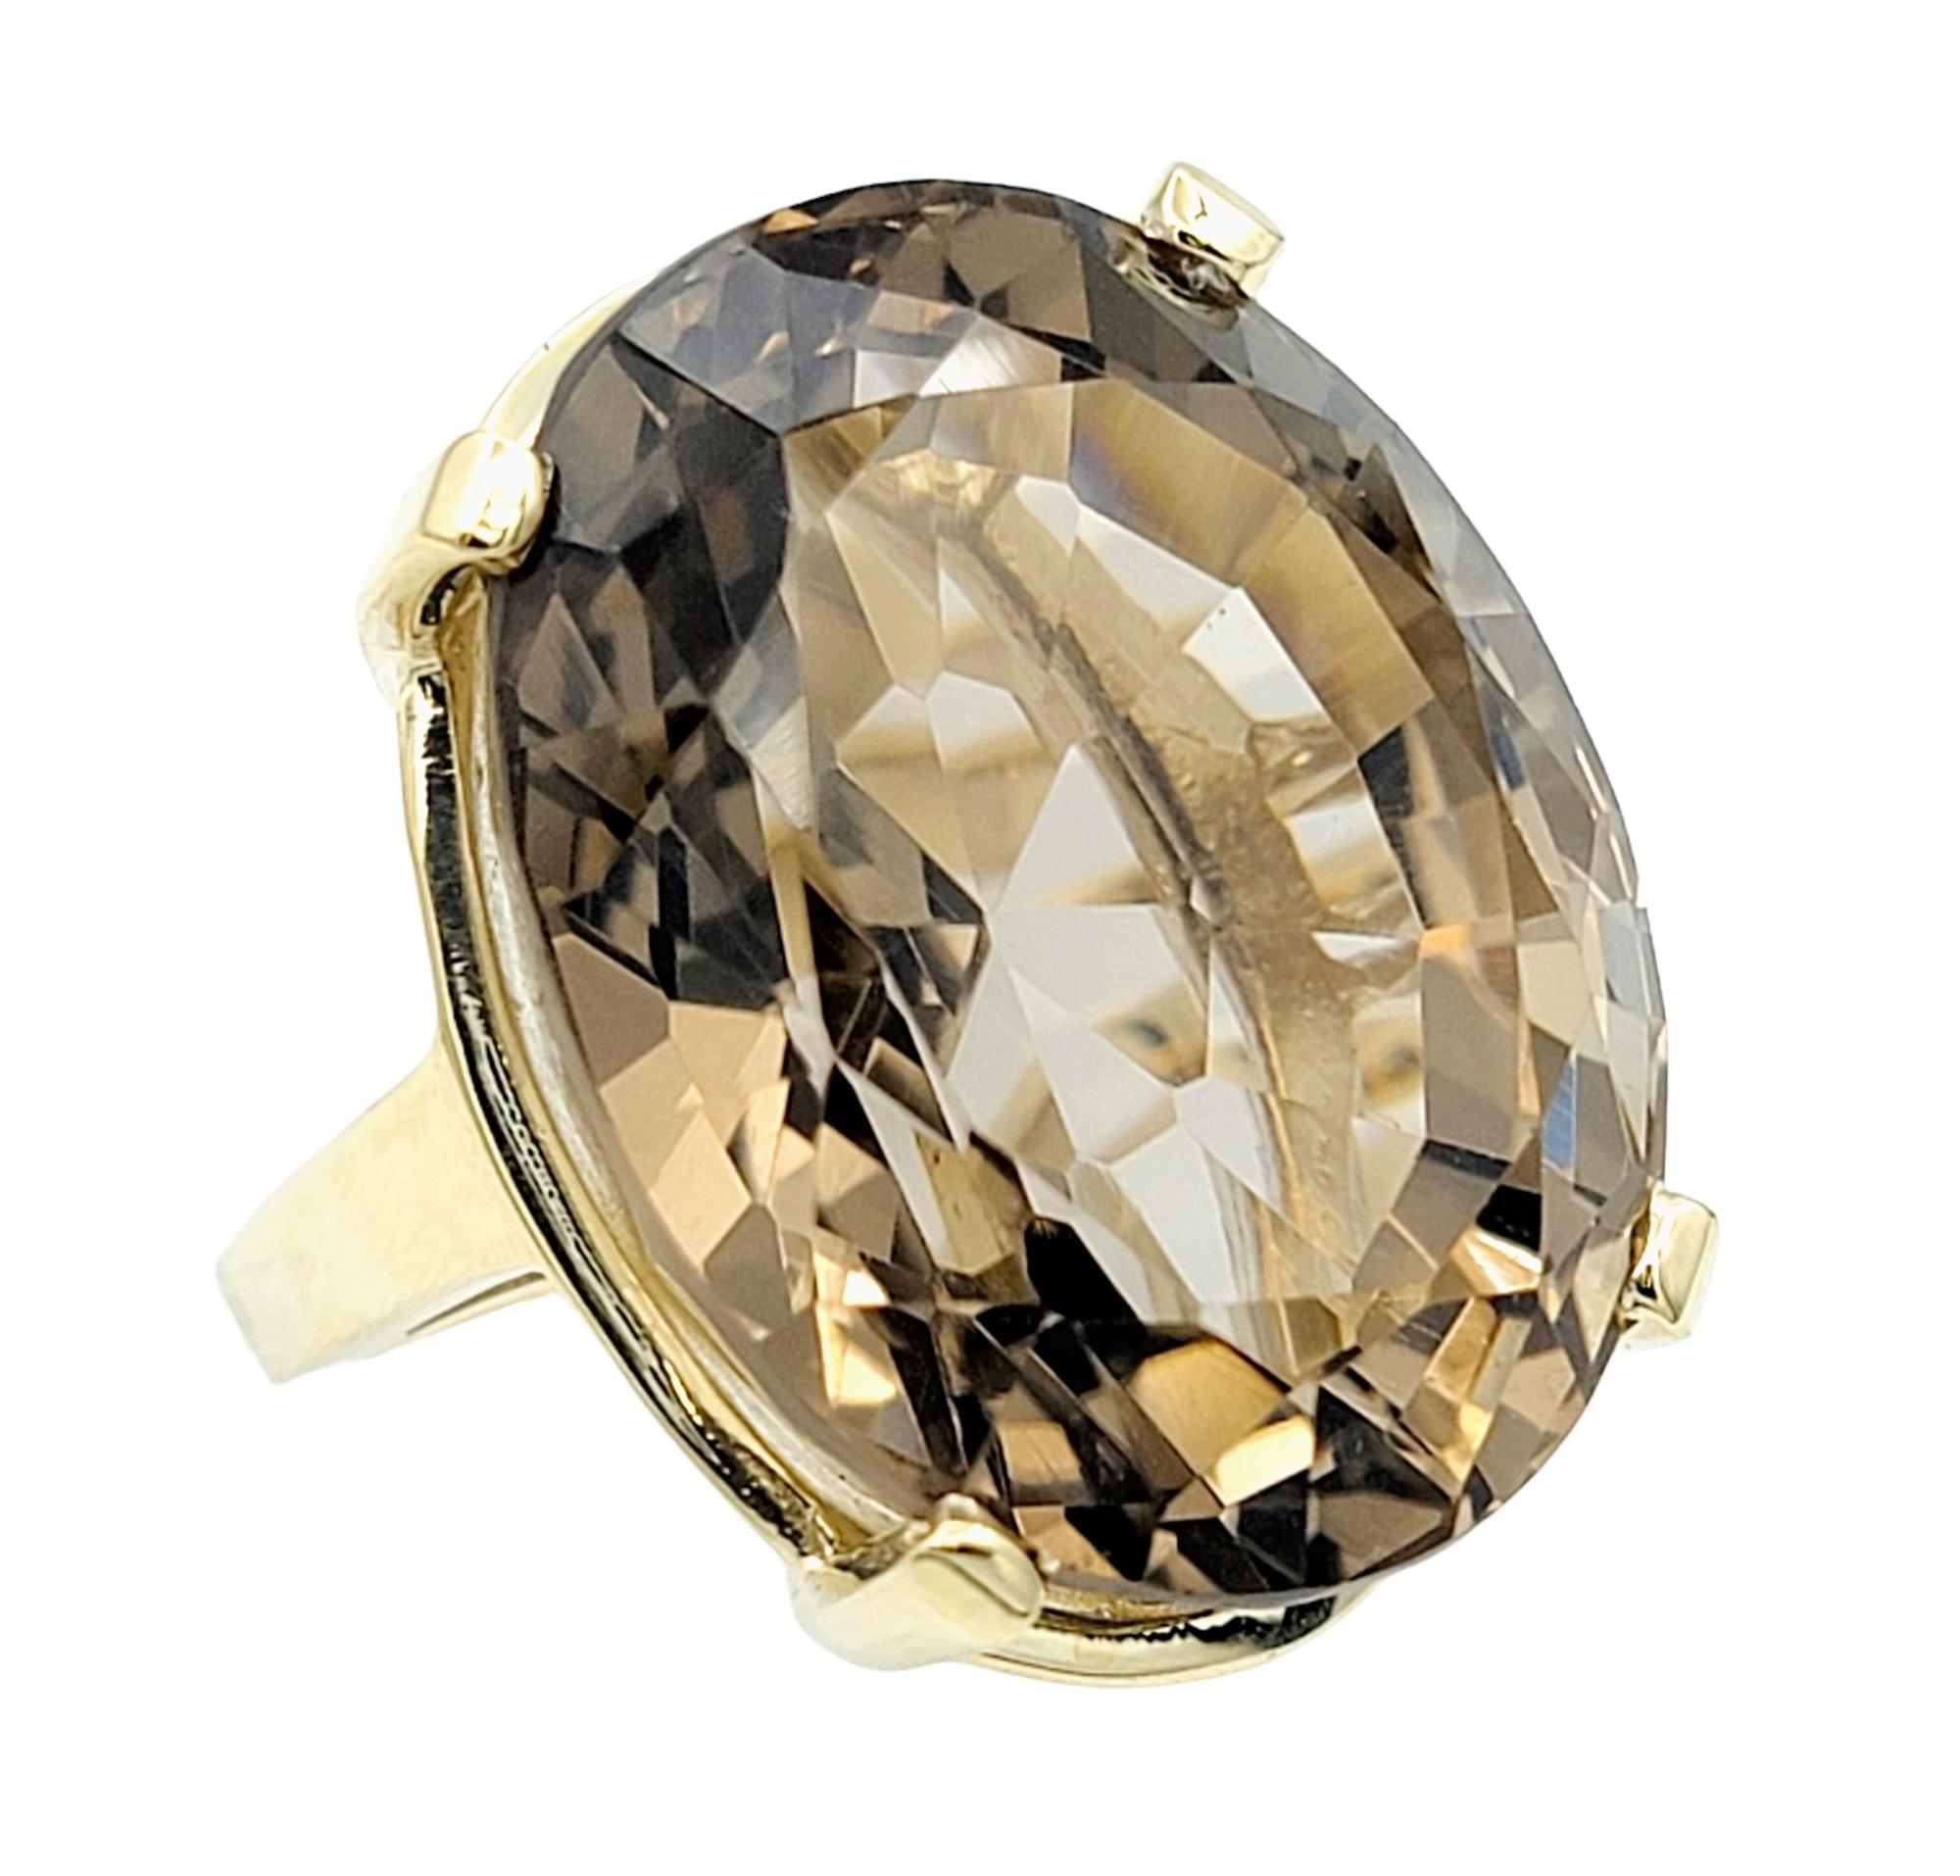 Contemporary 50.71 Carat Oval Cut Smoky Quartz Solitaire 14 Karat Yellow Gold Cocktail Ring For Sale